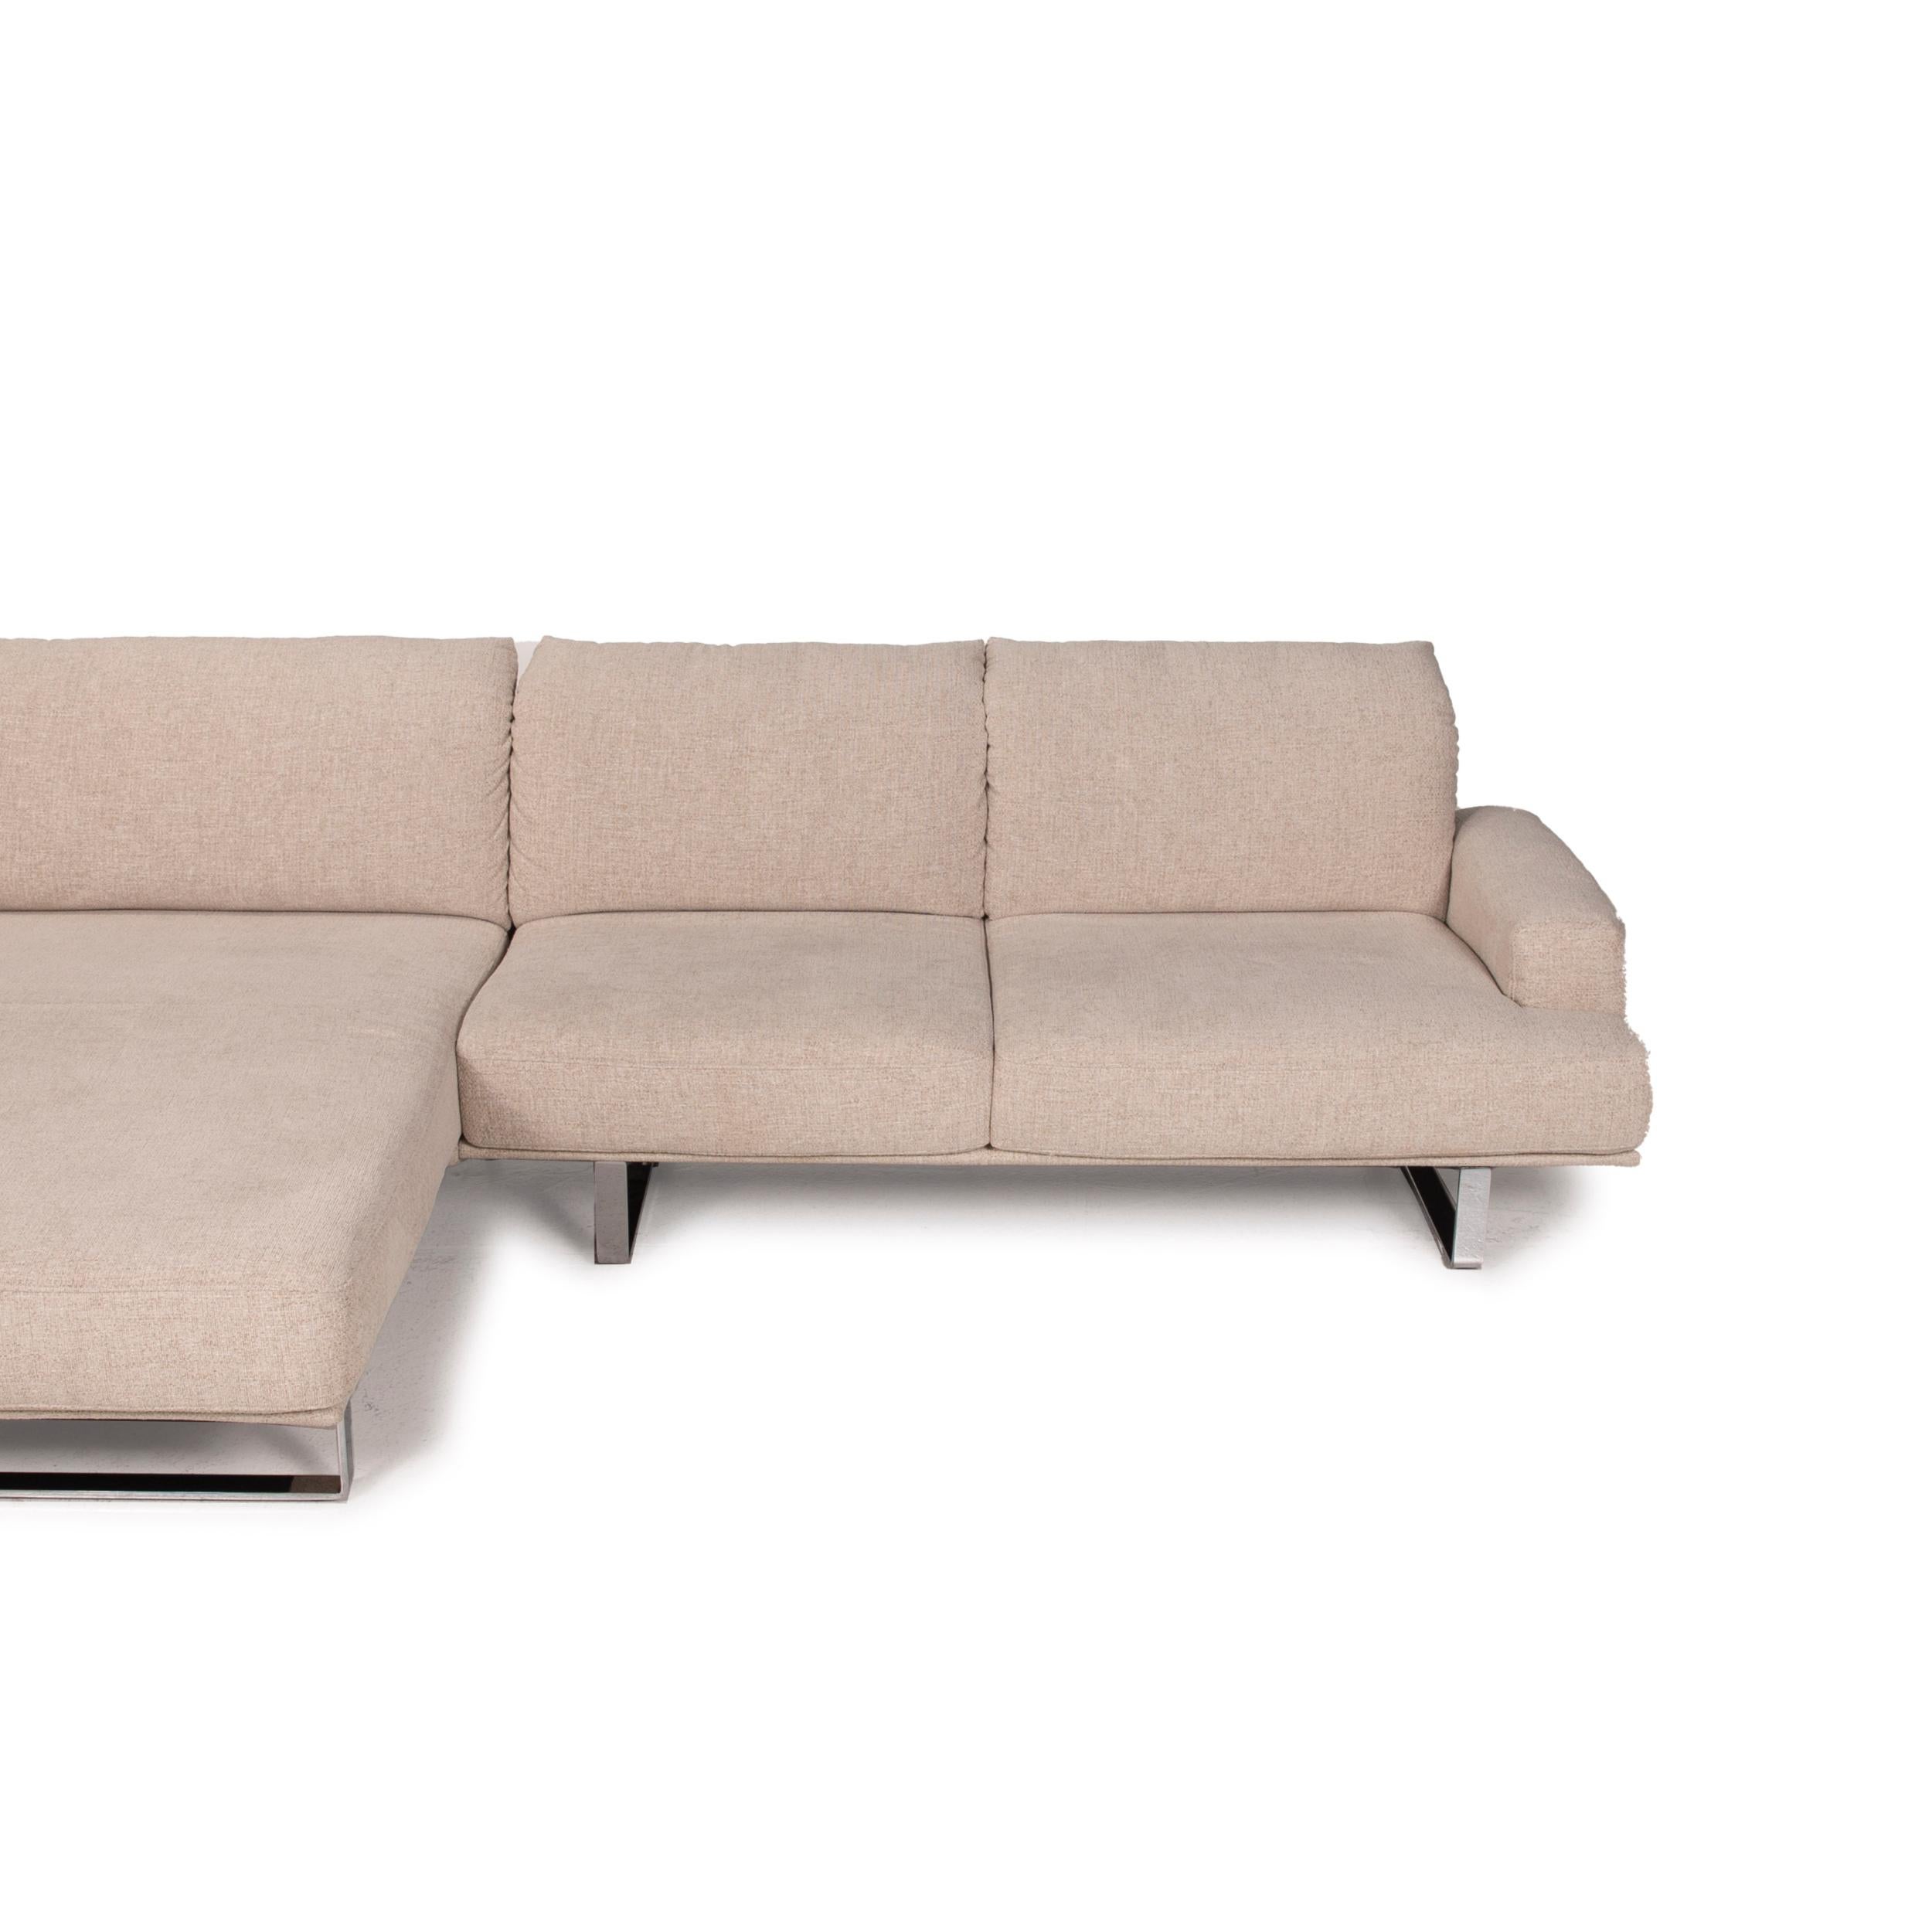 Dieter Knoll Collection Lesina Fabric Sofa Cream Corner Sofa Electrical Function 2